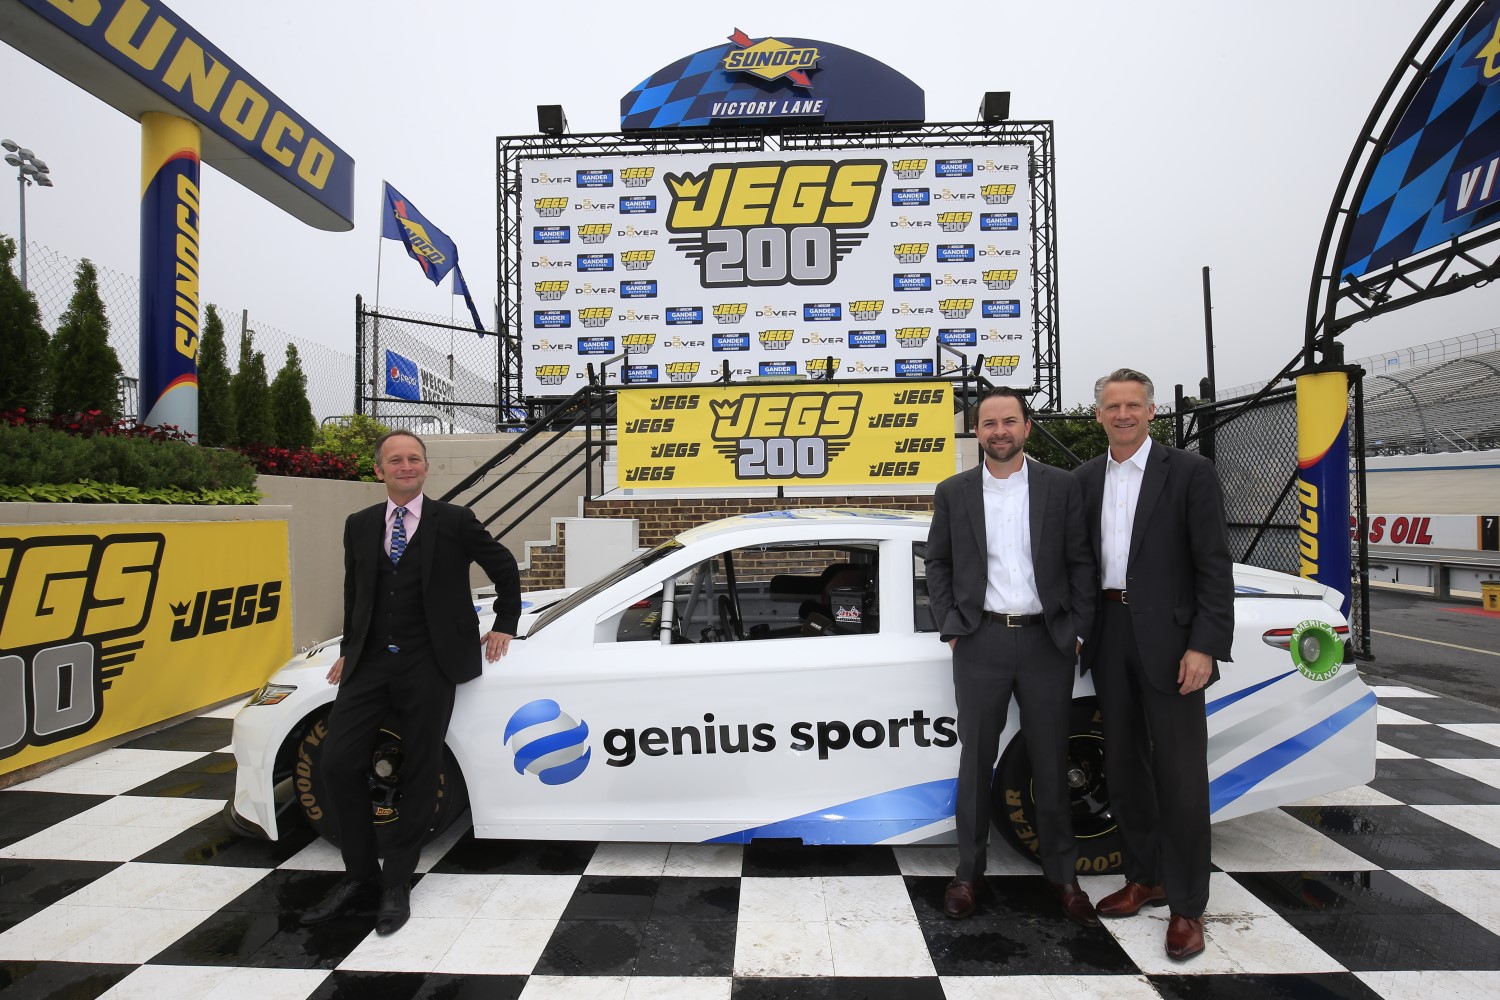 (From left to right) Chris Dougan, Genius Sports Chief Communications Officer and NASCAR's Scott Warfield and Steve Phelps pose for a photo during partnership announcement.